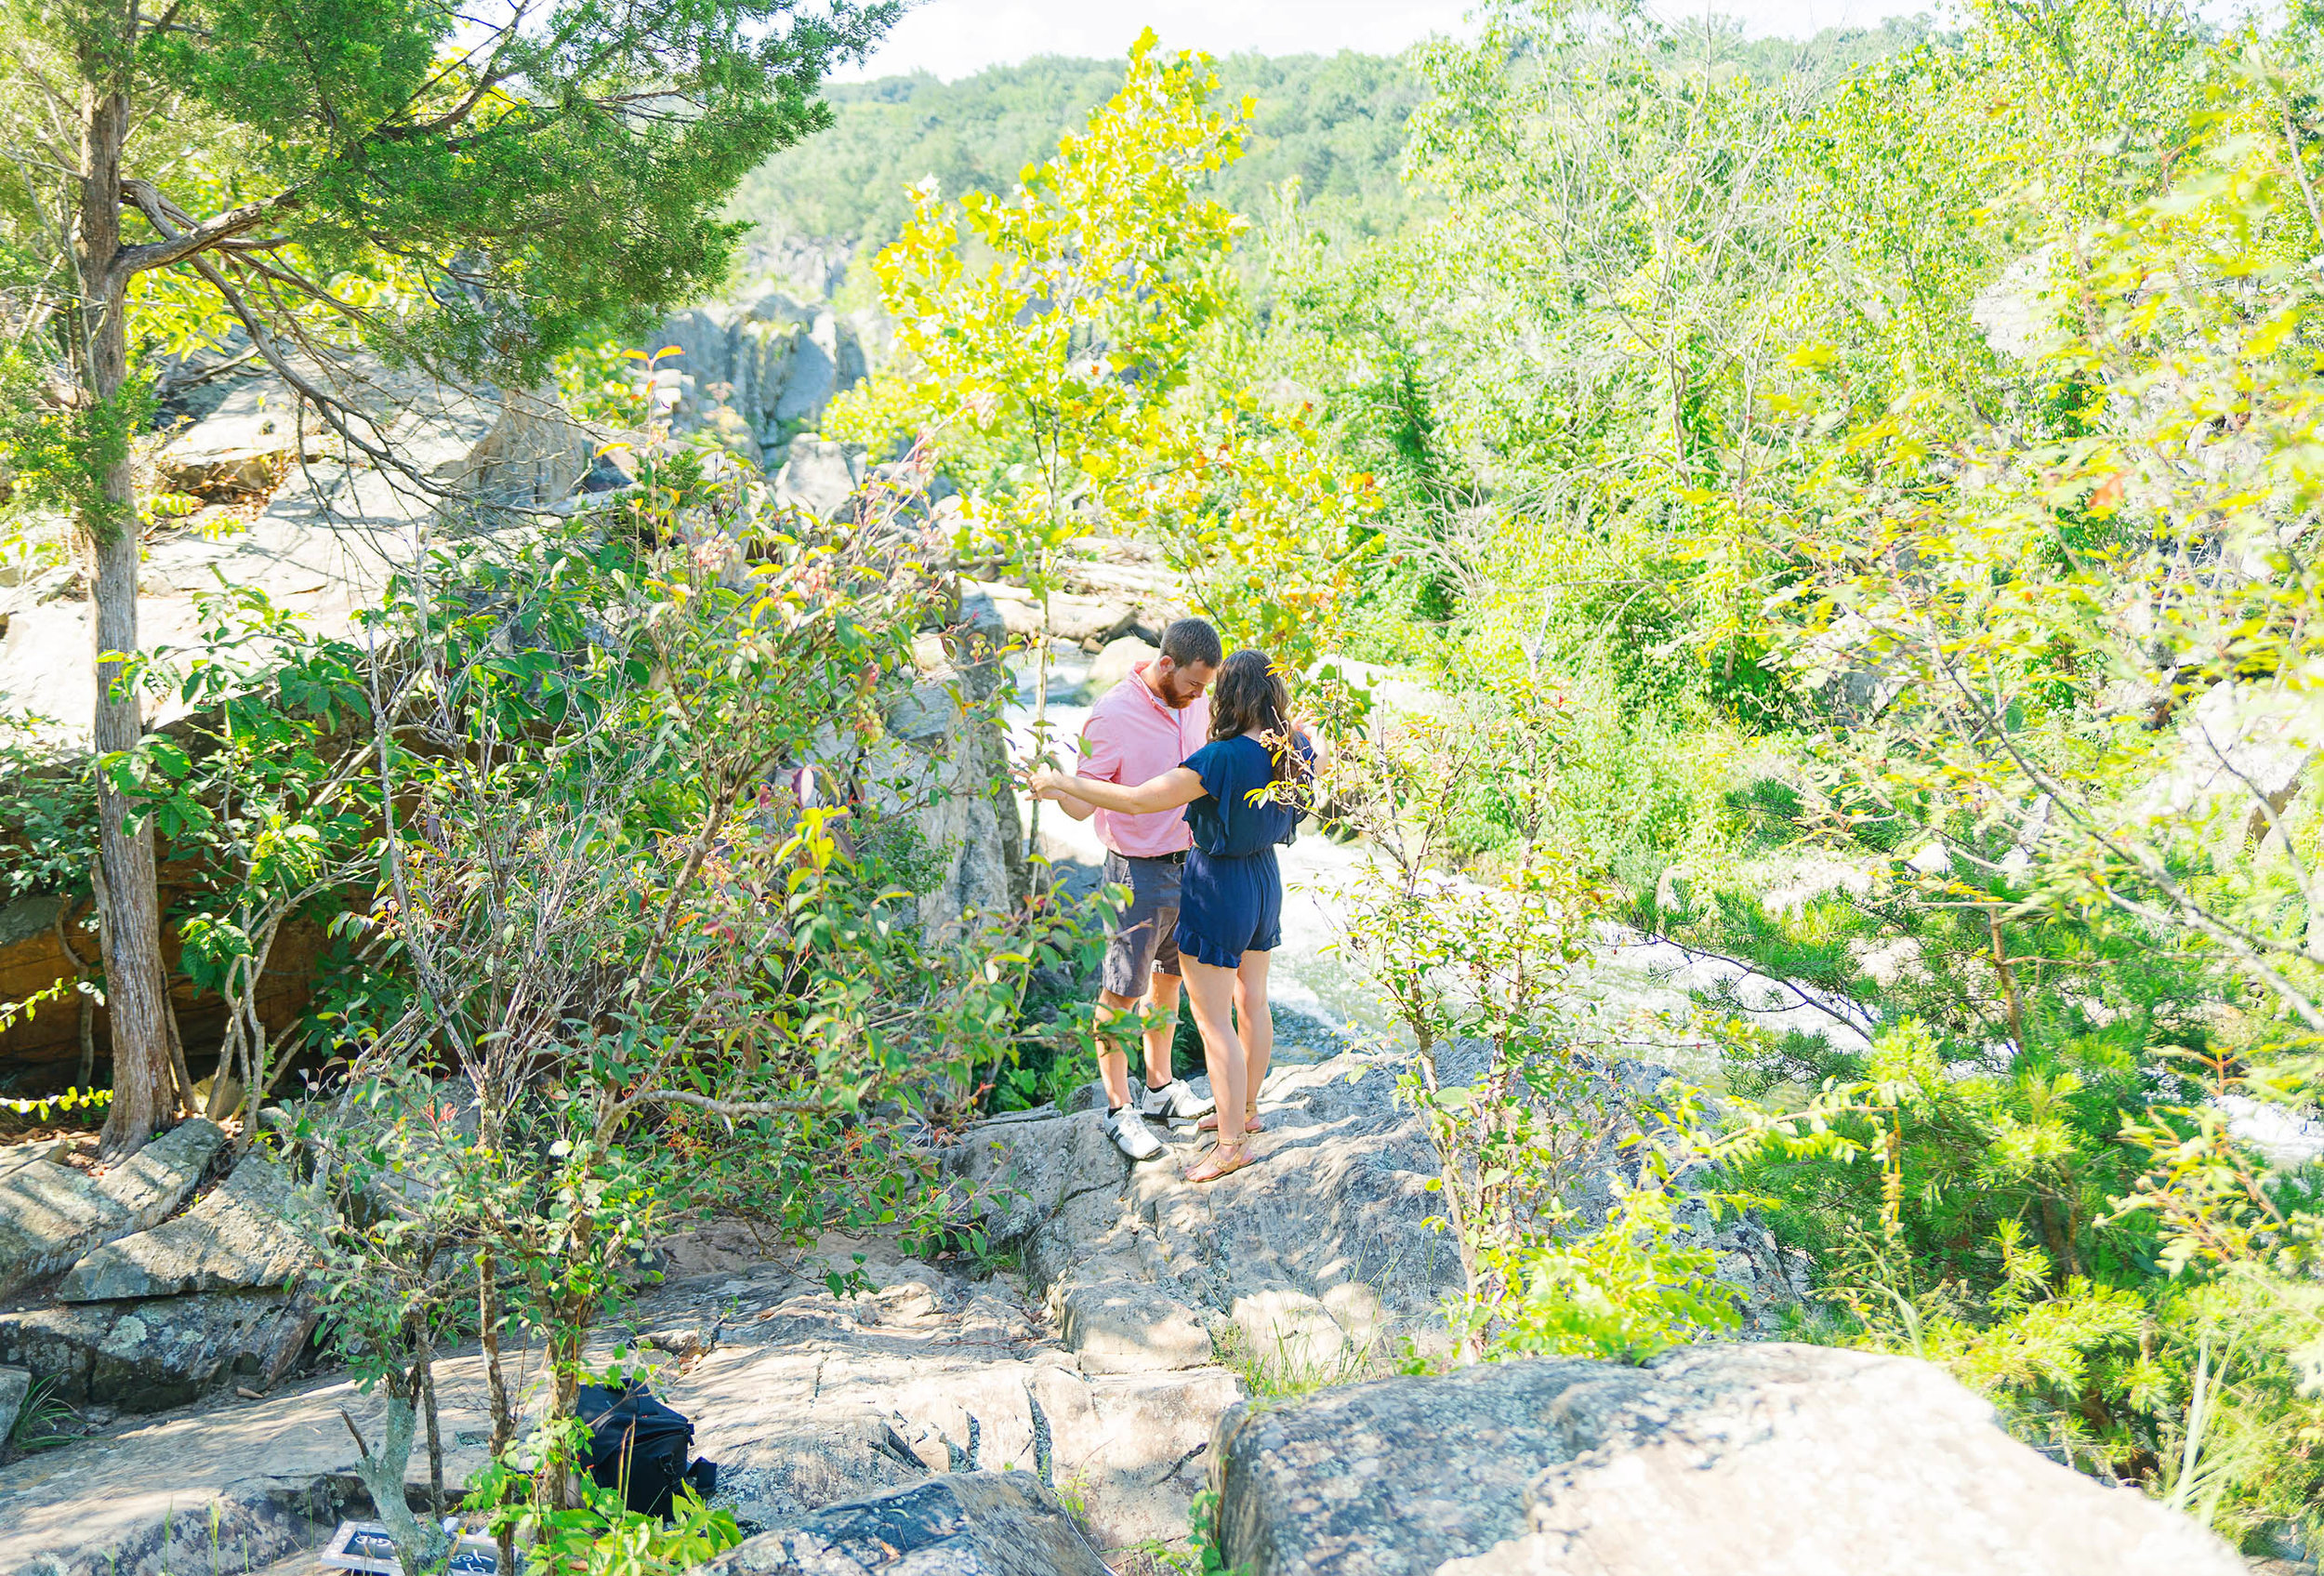 Engagement photos from Great Falls Park in Maryland